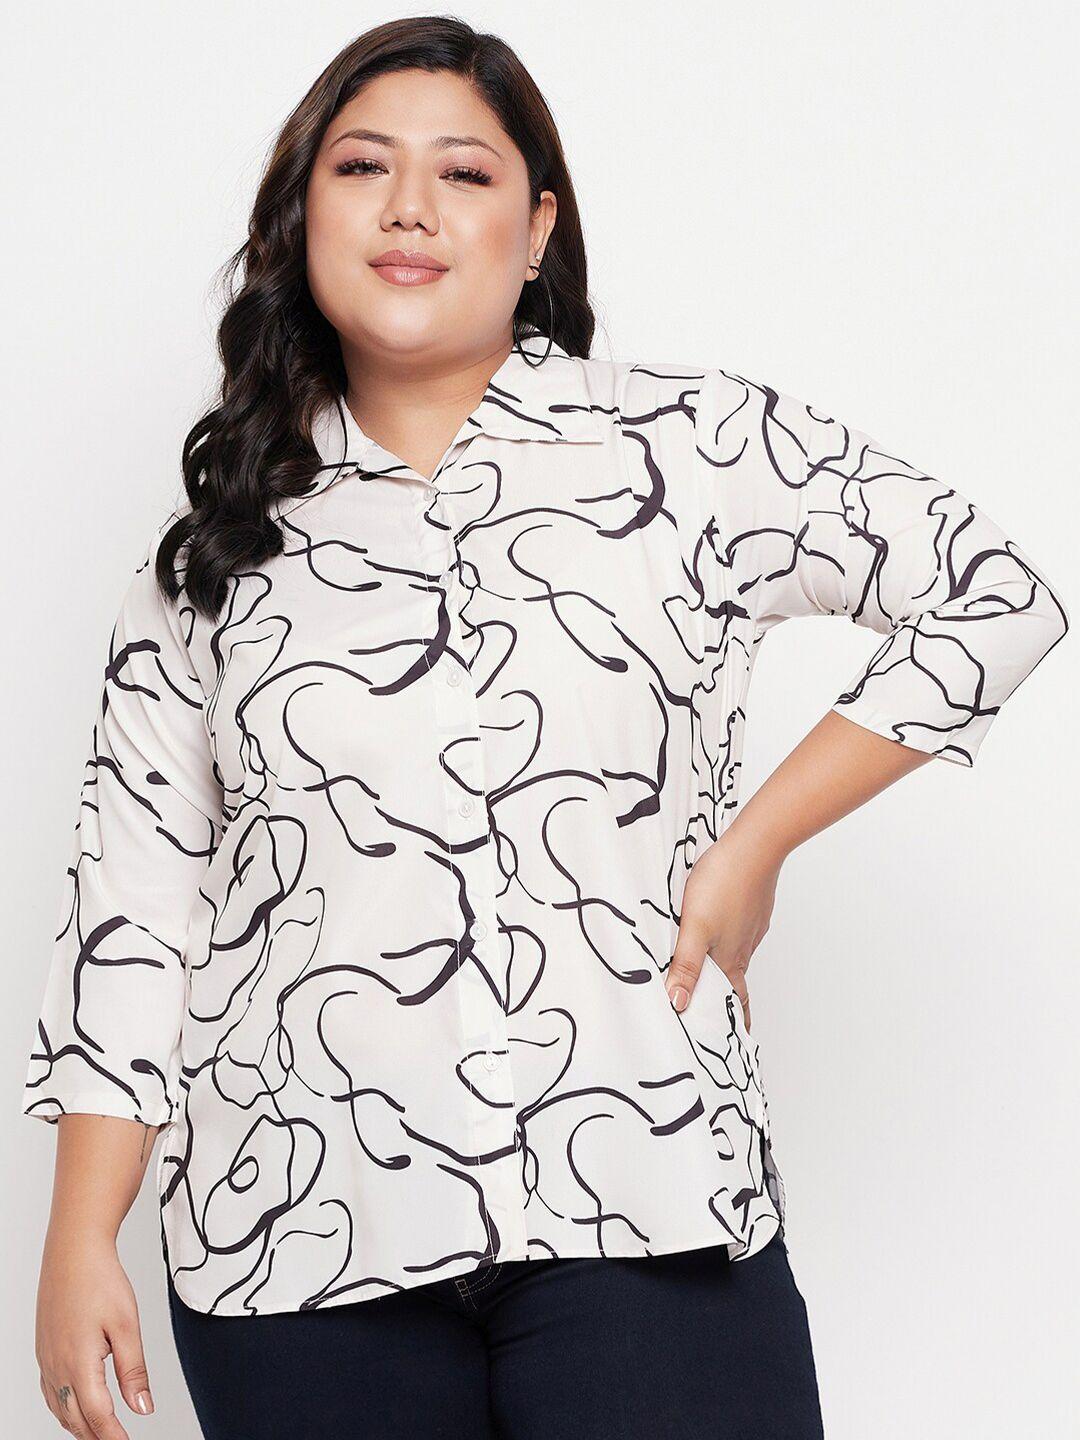 NABIA Plus Size Abstract Printed Shirt Style Top.